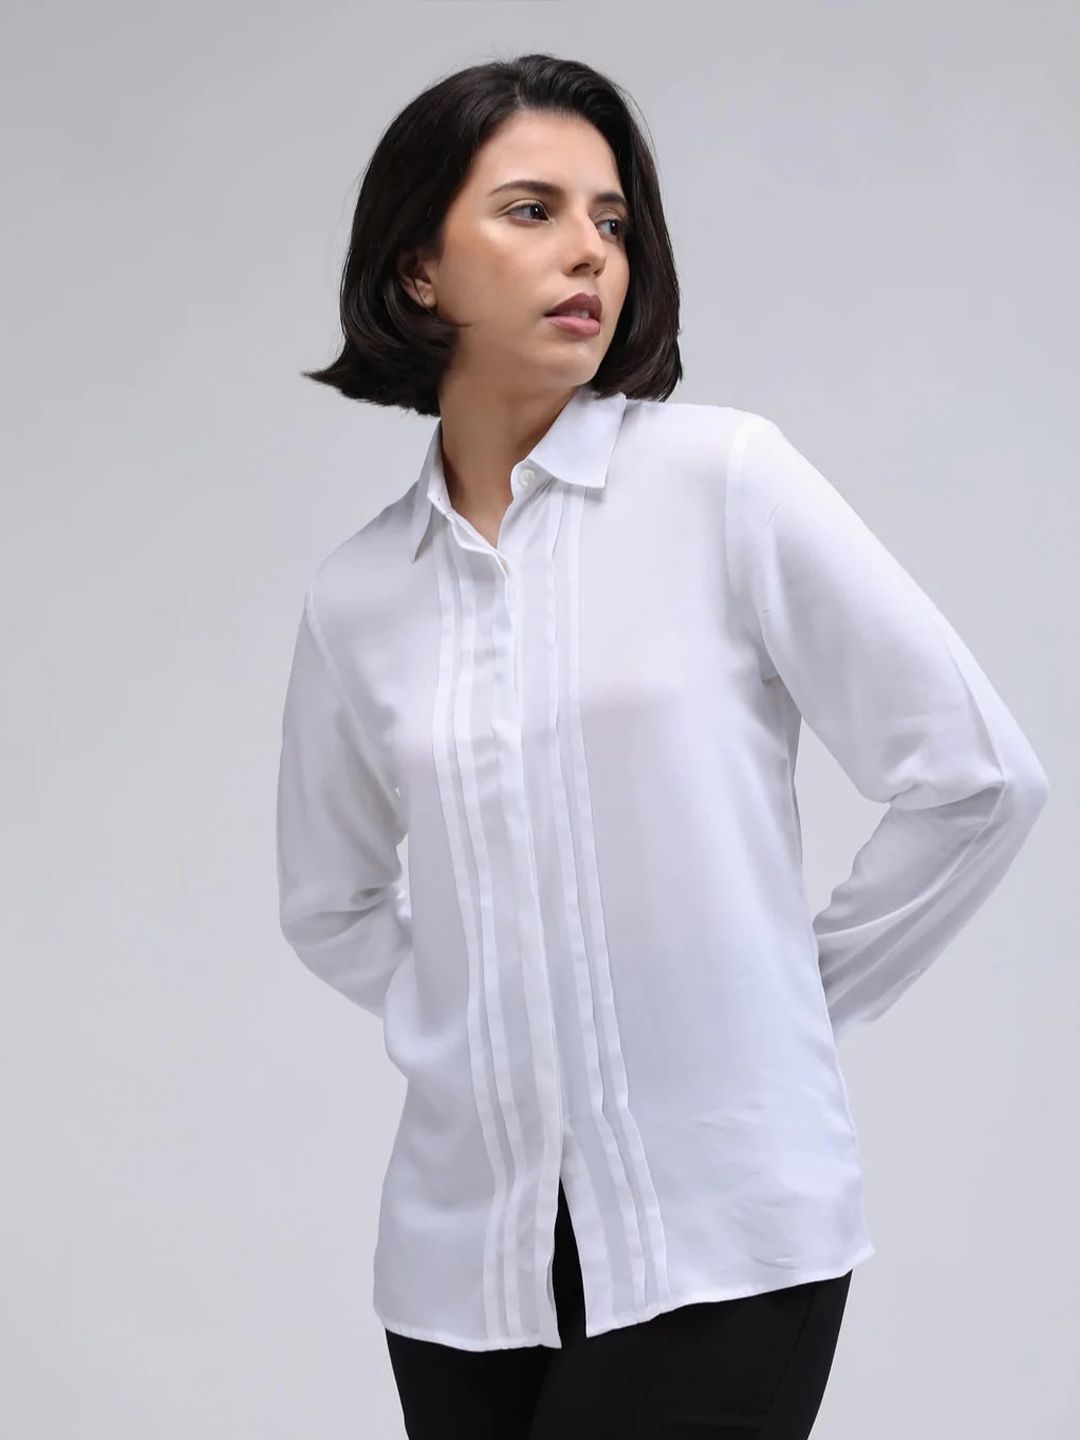 IDK White Shirt Style Top Price in India